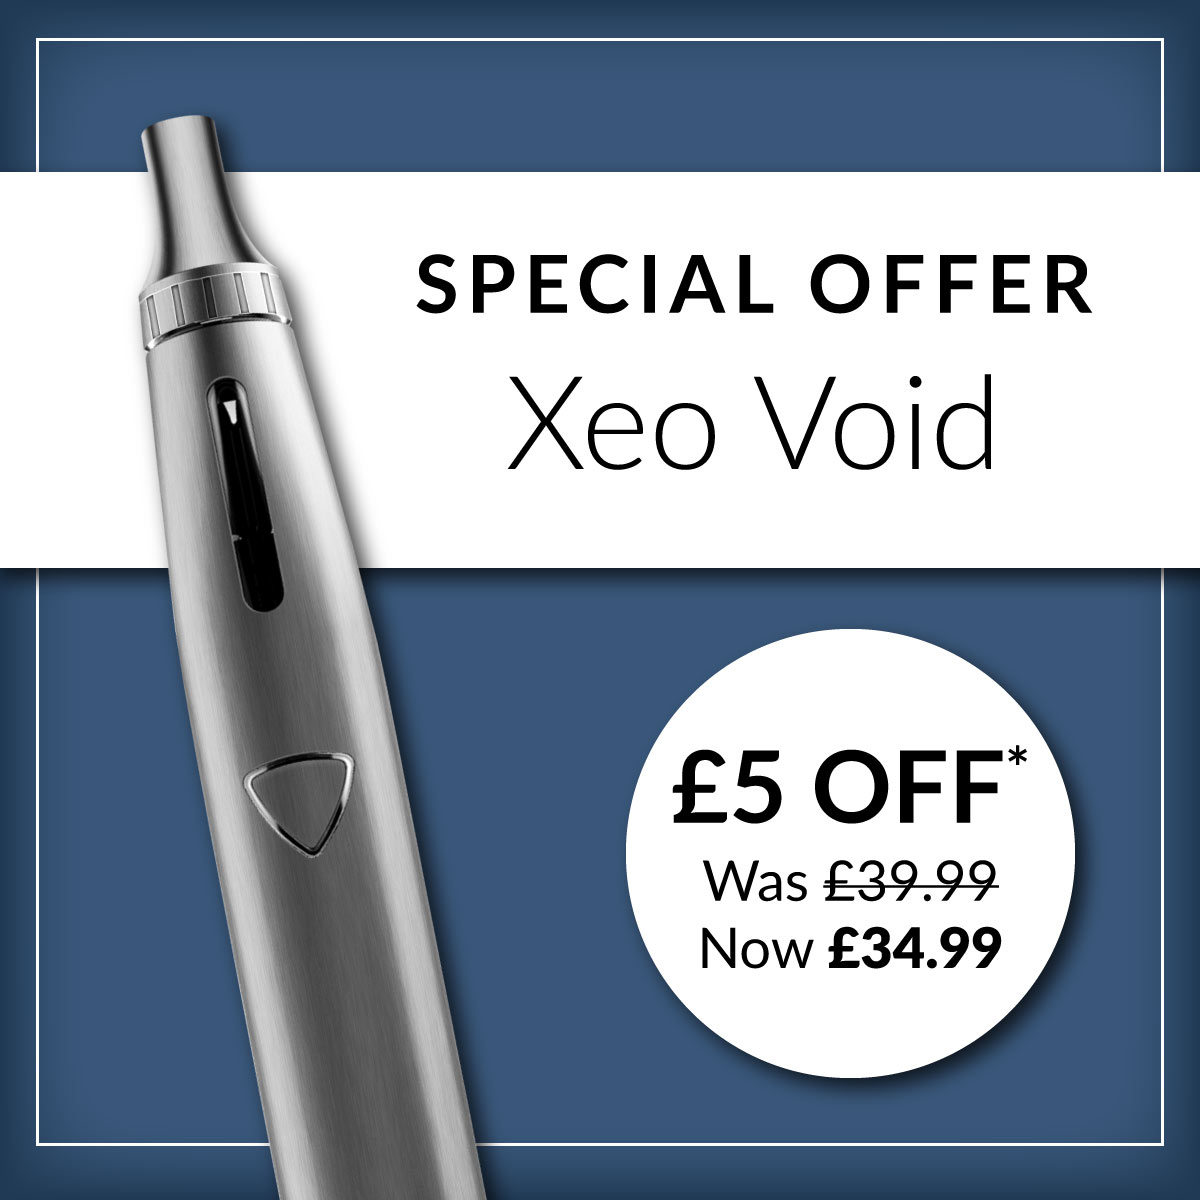 💥PRO 3 & XEO VOID £5 OFF💥

Offer ends Friday 24th March at 3pm

SHOP NOW: bit.ly/40qDbrP or click the link in our bio!

#ukvapedeals #ukeliquidoffers #dealoftheday